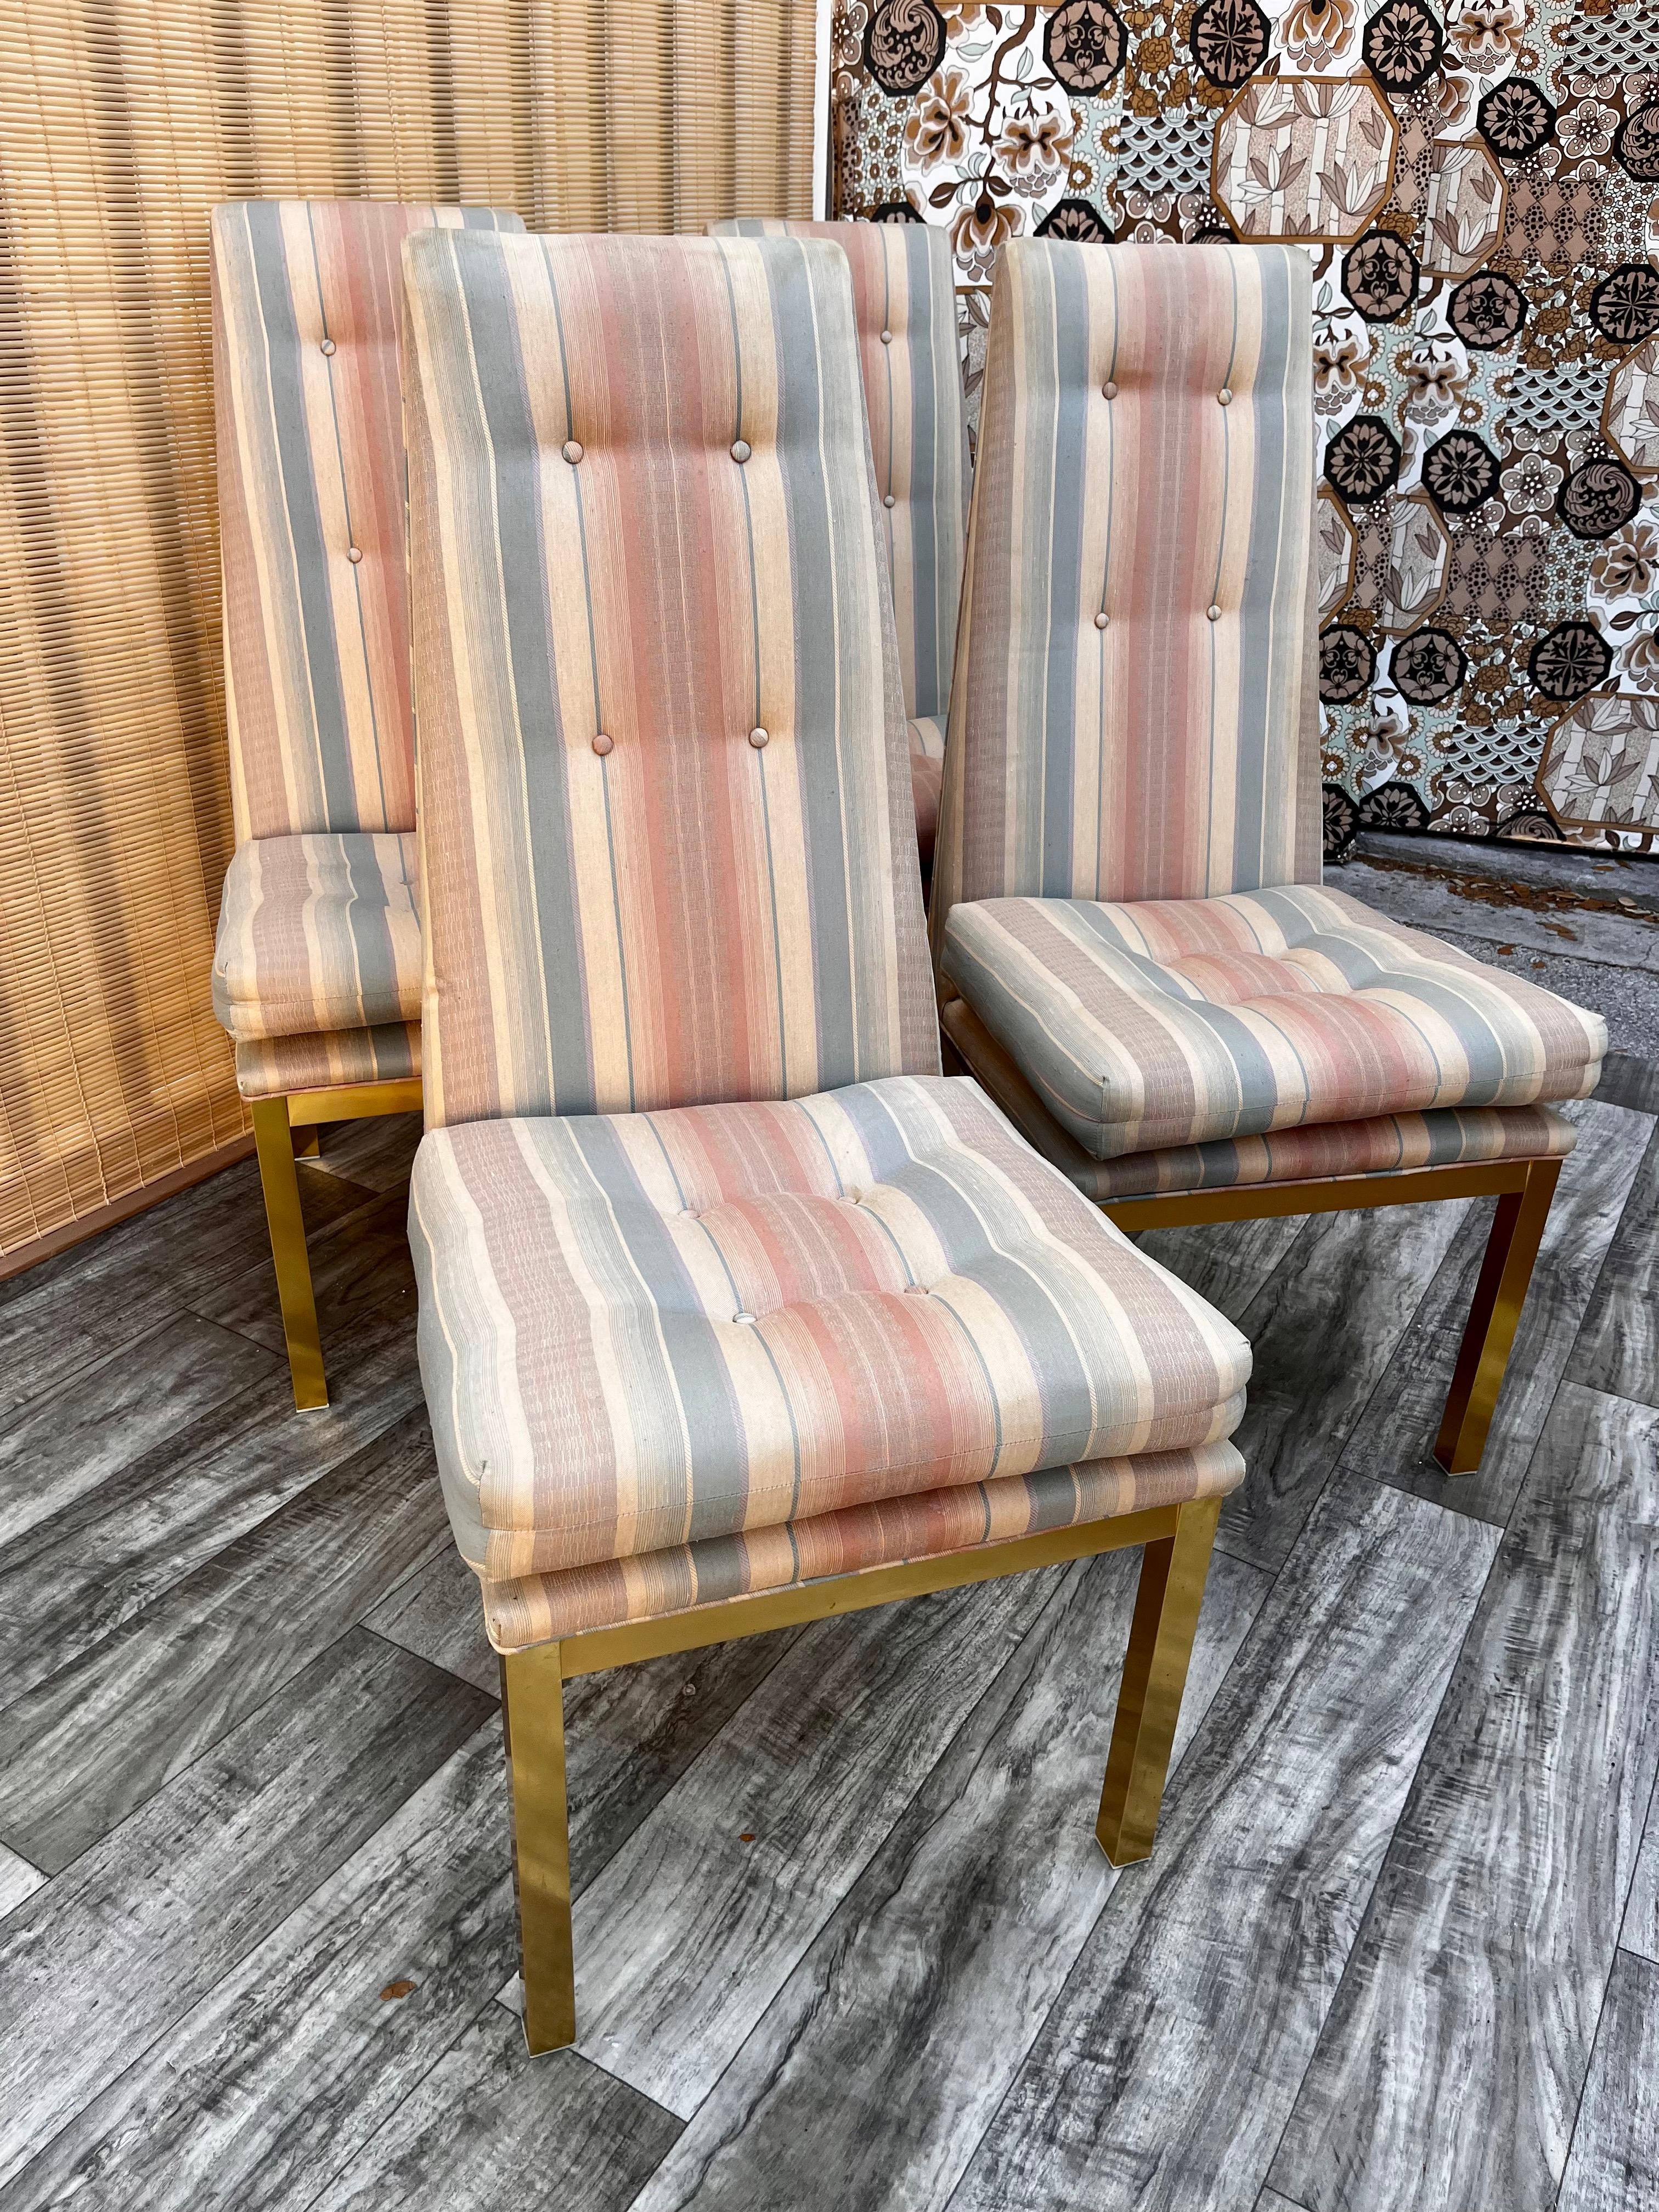 Set of four vintage Mid-Century Modern upholstered dining chairs in the Adrain Pearsall's Style. circa 1960s.
Feature a quintessential Mid-Century Modern high back design with tufted pastel colors striped upholstery and golden anodized aluminum